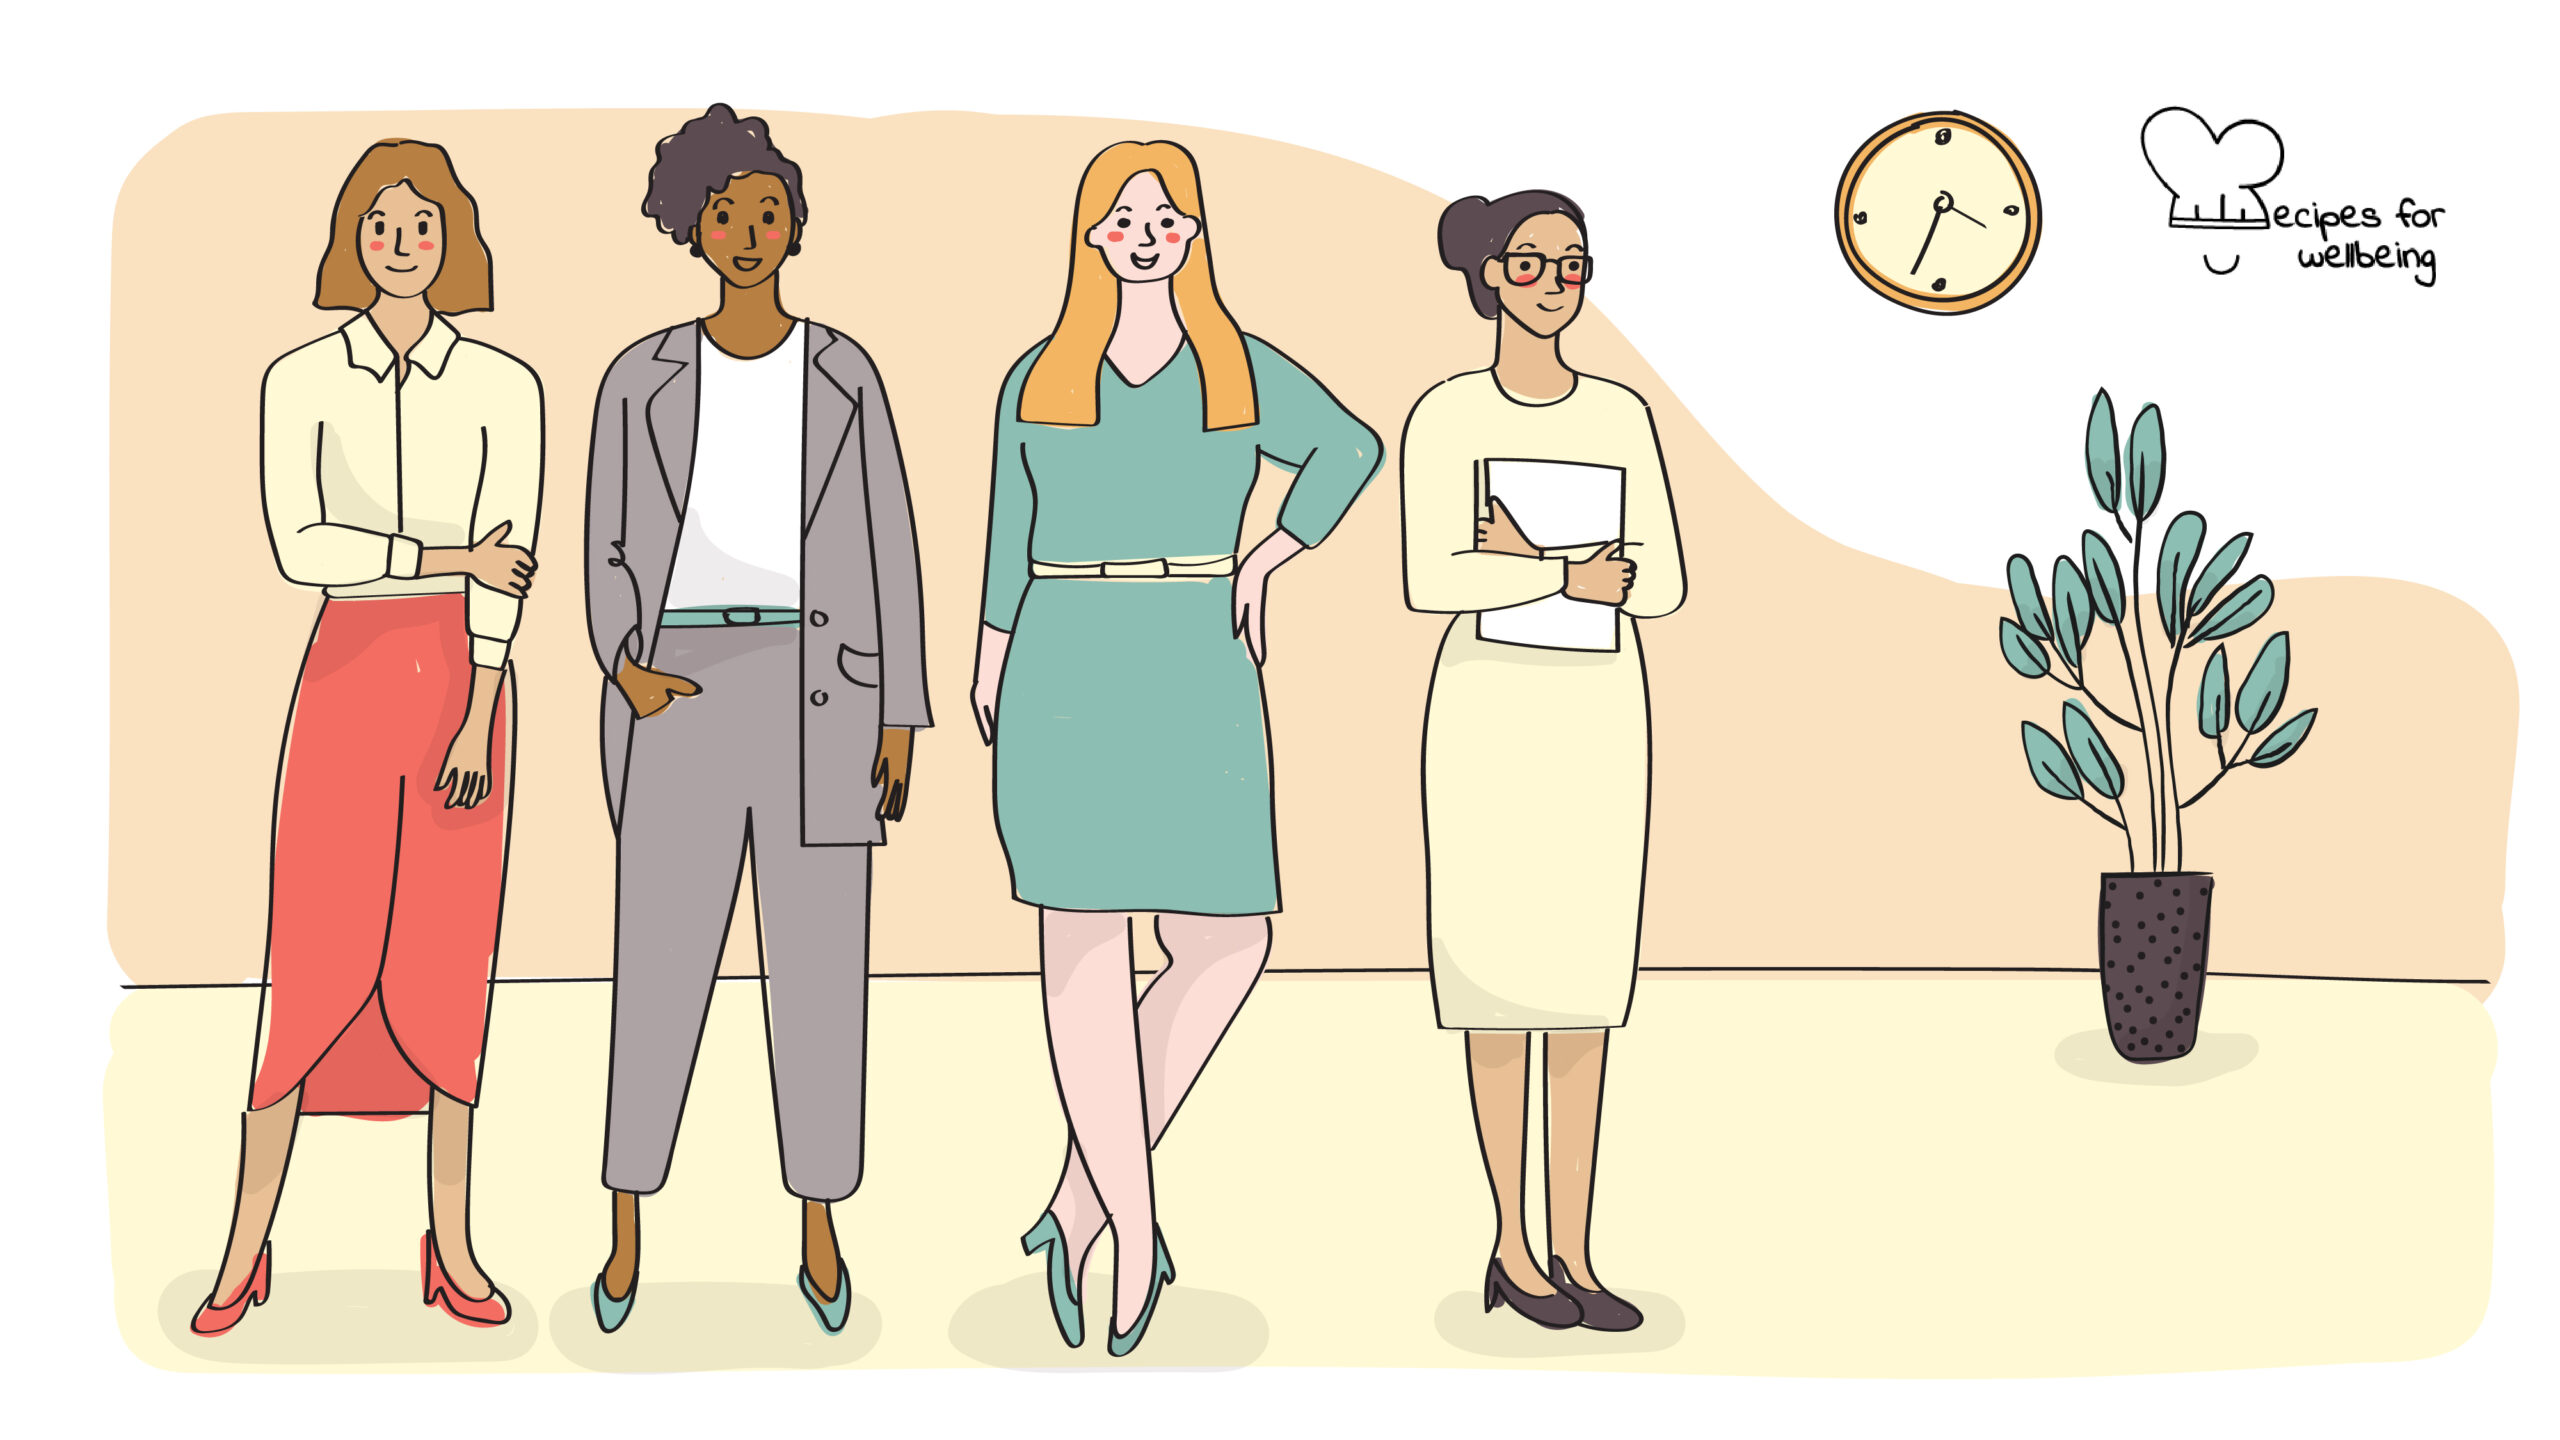 Illustration of a group of 4 womxn in work attire standing next to each other. © Recipes for Wellbeing